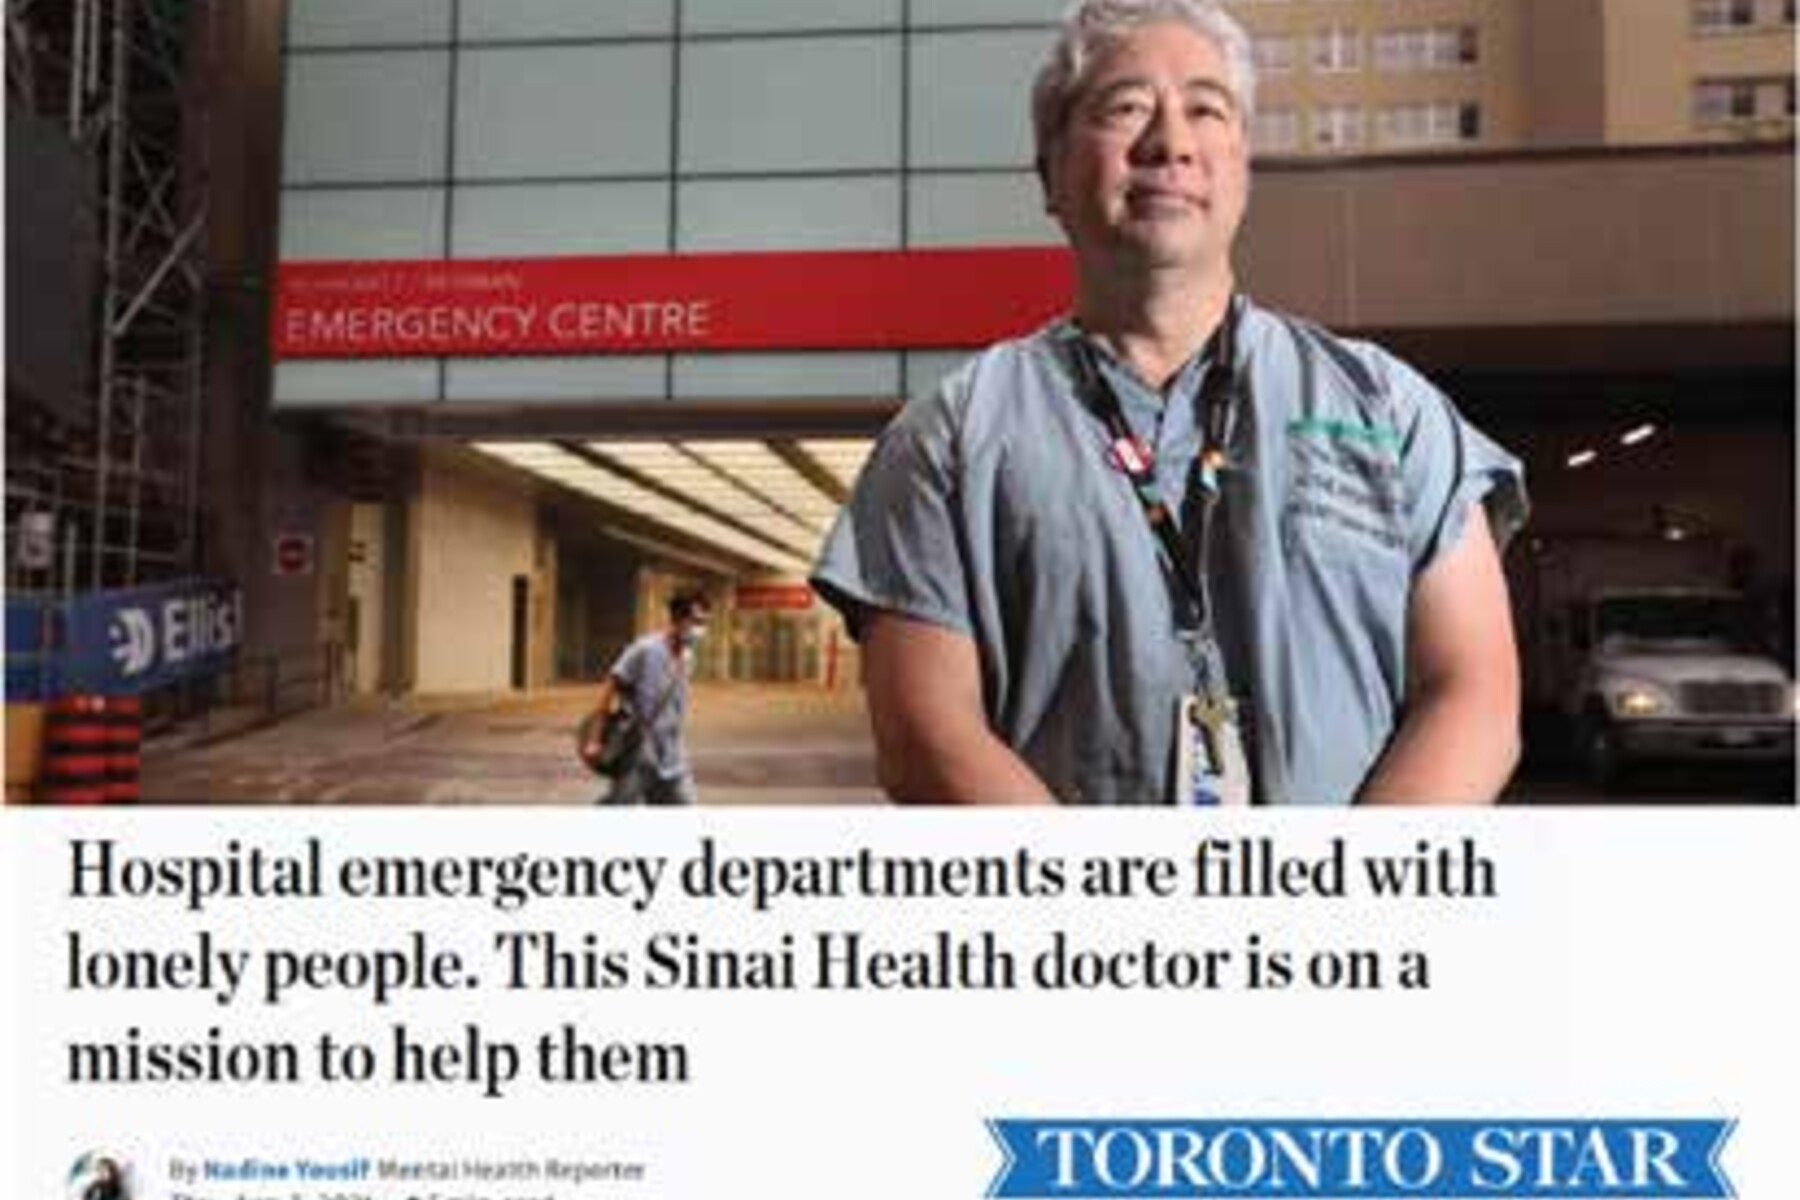 Jacques Lee Toronto Star article screenshot - Hospital emergency departments are filled with lonely people.  This Sinai Health doctor is on a mission to help them.